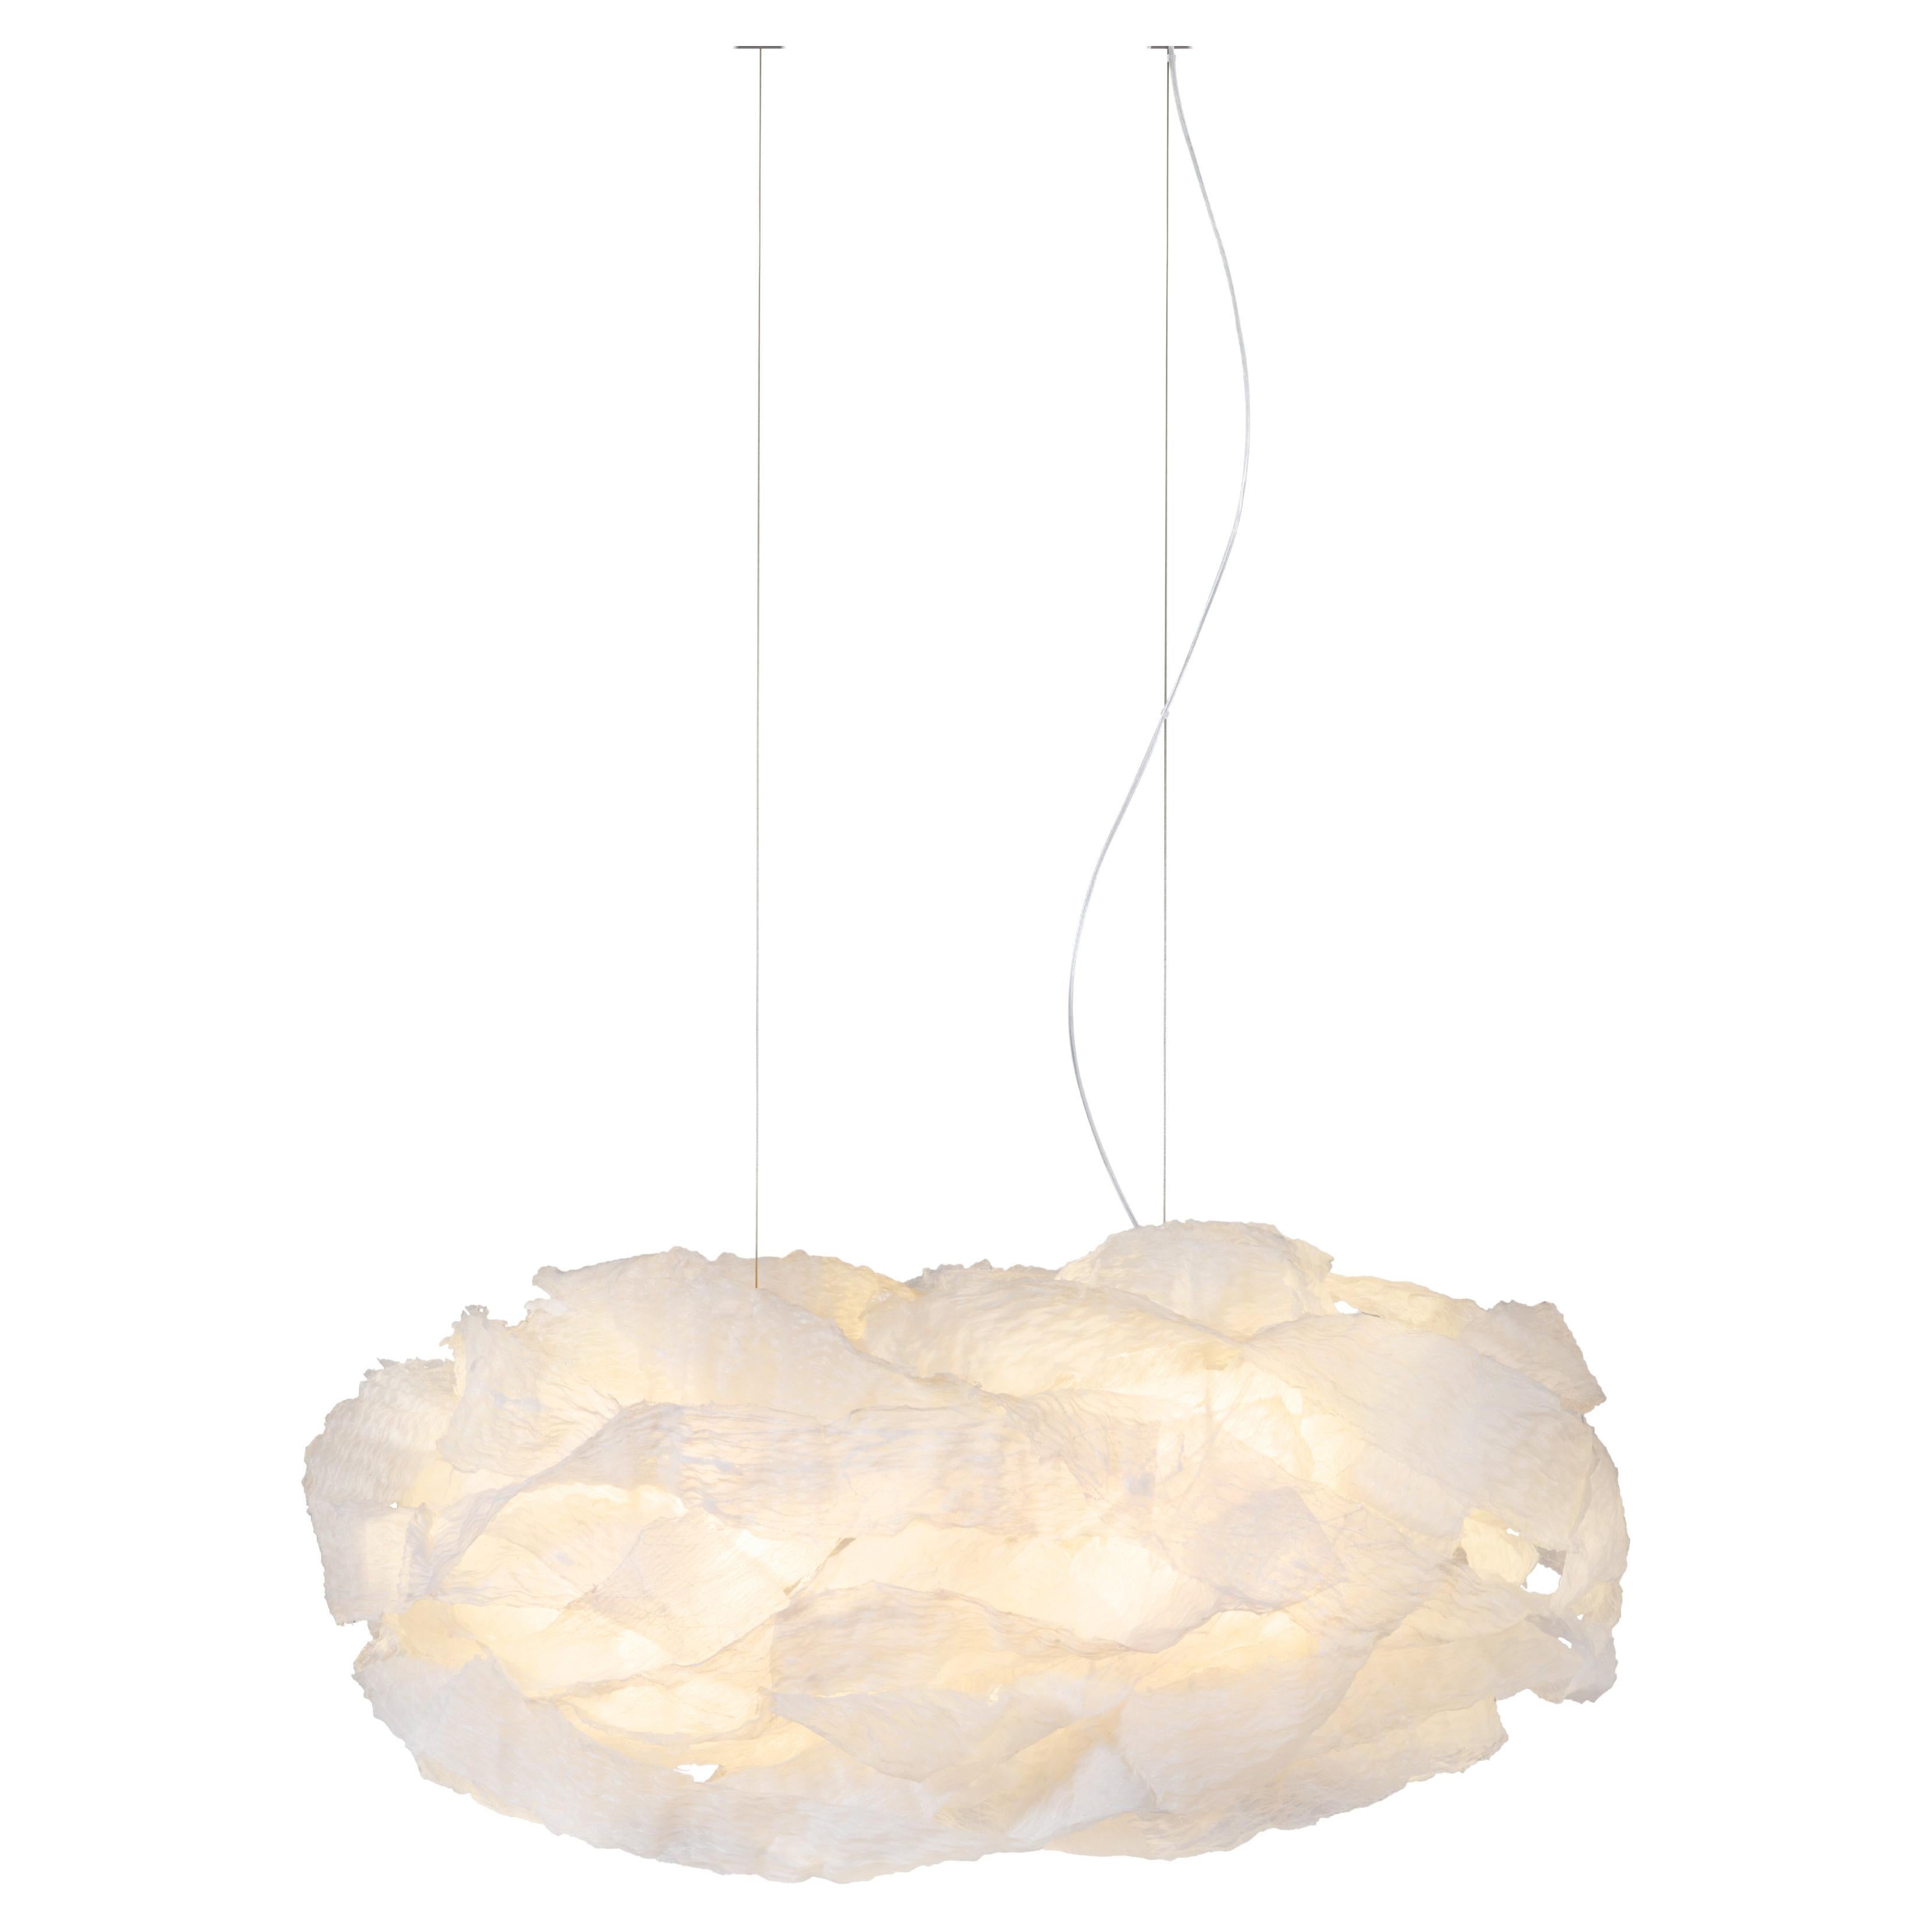 Transcendence 2 by Ango, Diaphanous Cloud Pendant Light, Hand-Crafted Edition For Sale